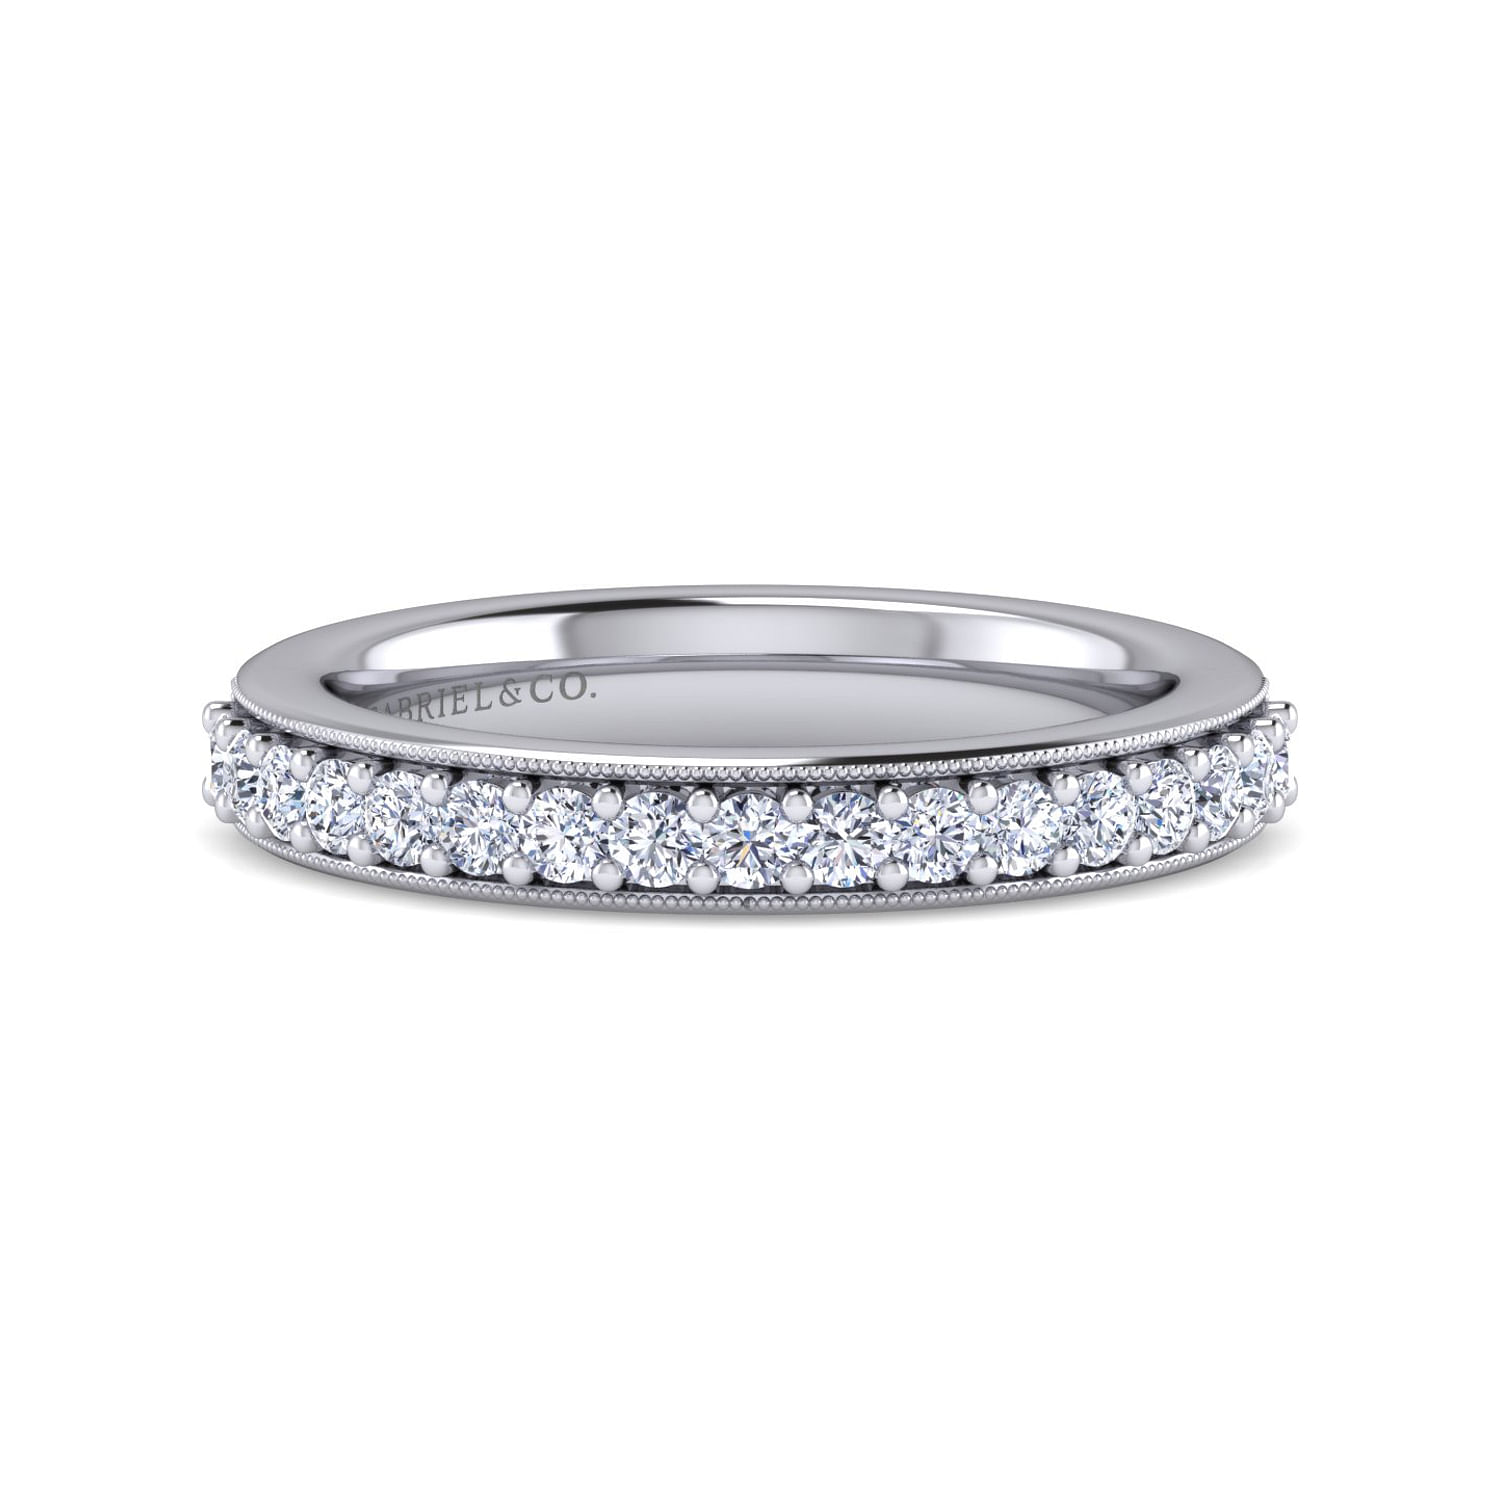 Lumierre - 14K White Gold Channel Prong Diamond Anniversary Band with Millgrain